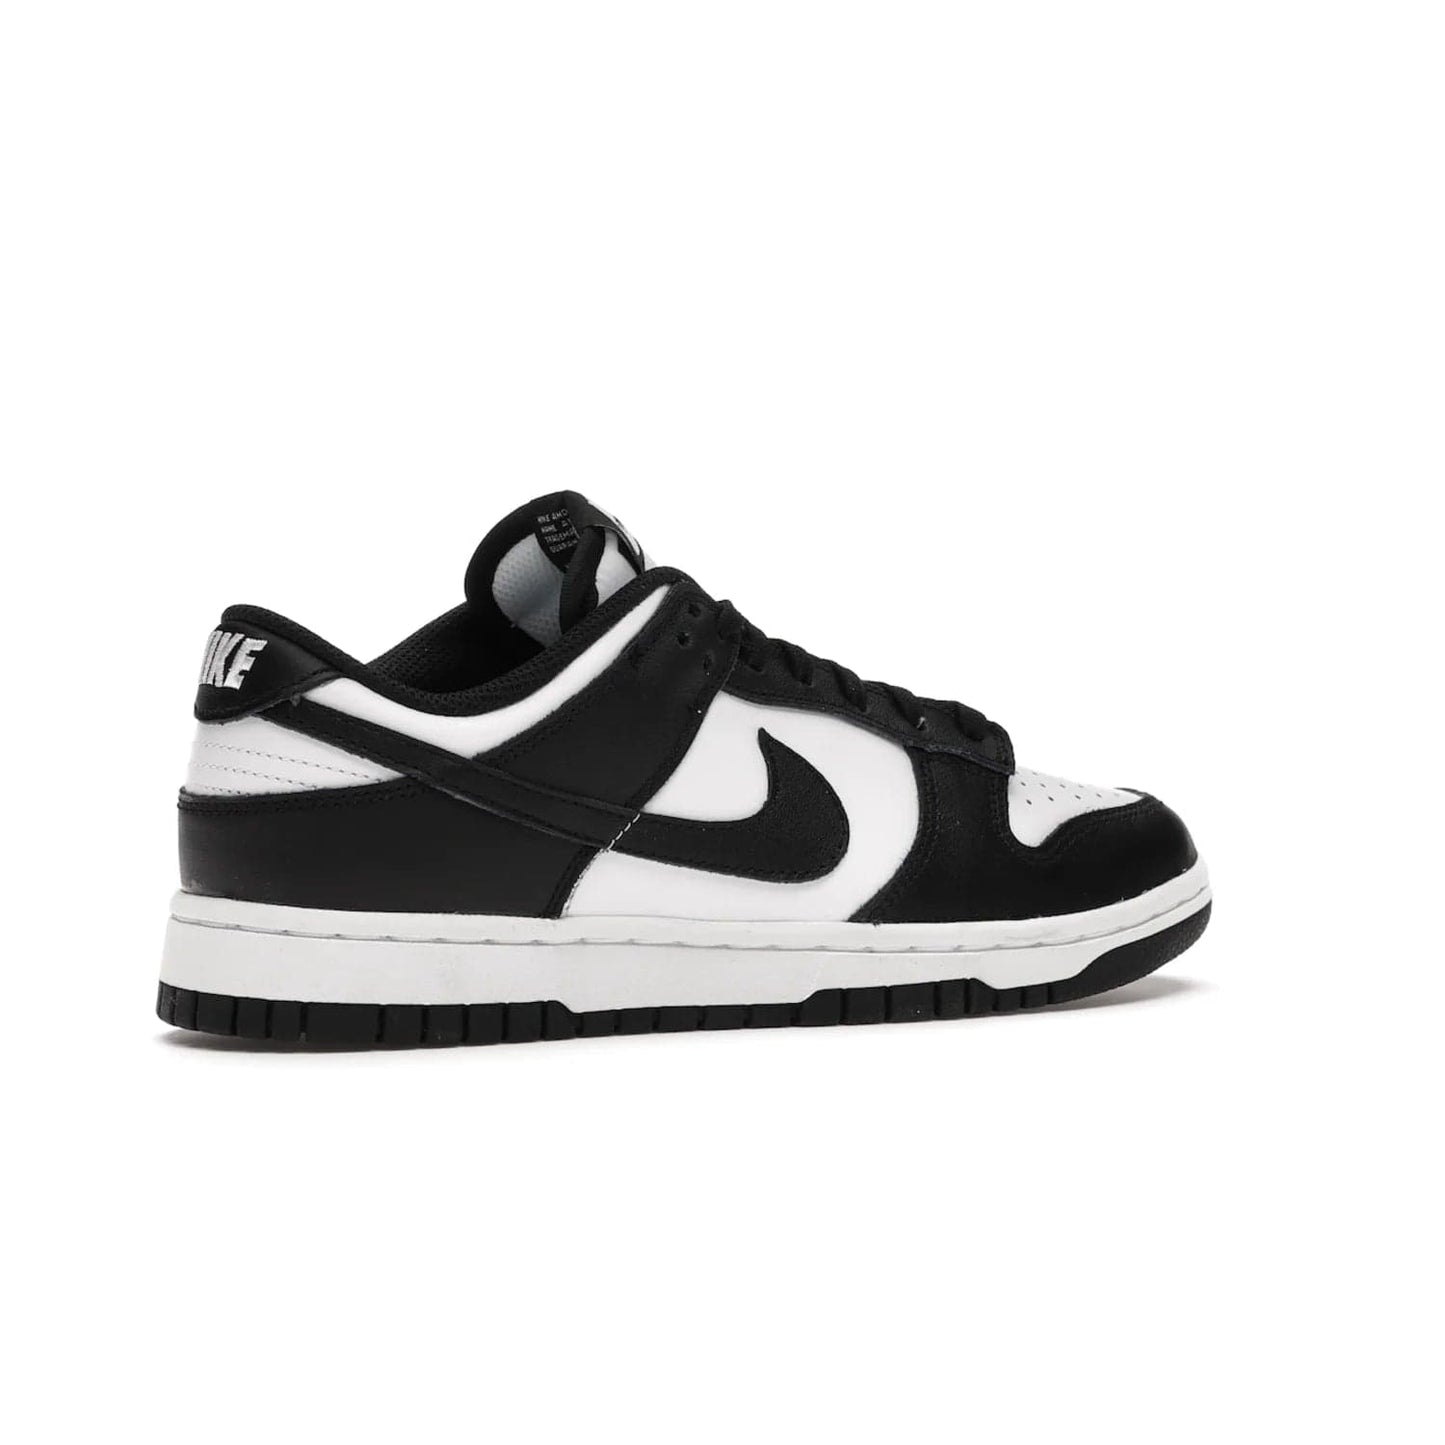 Nike Dunk Low Retro White Black Panda (2021) (Women's) - Image 34 - Only at www.BallersClubKickz.com - Say hello to the new Nike Dunk Low Retro White Black Panda (2021) (Women's)! White & black leather upper with Nike Swoosh logo. Get your pair for $100 in March 2021! Shop now!